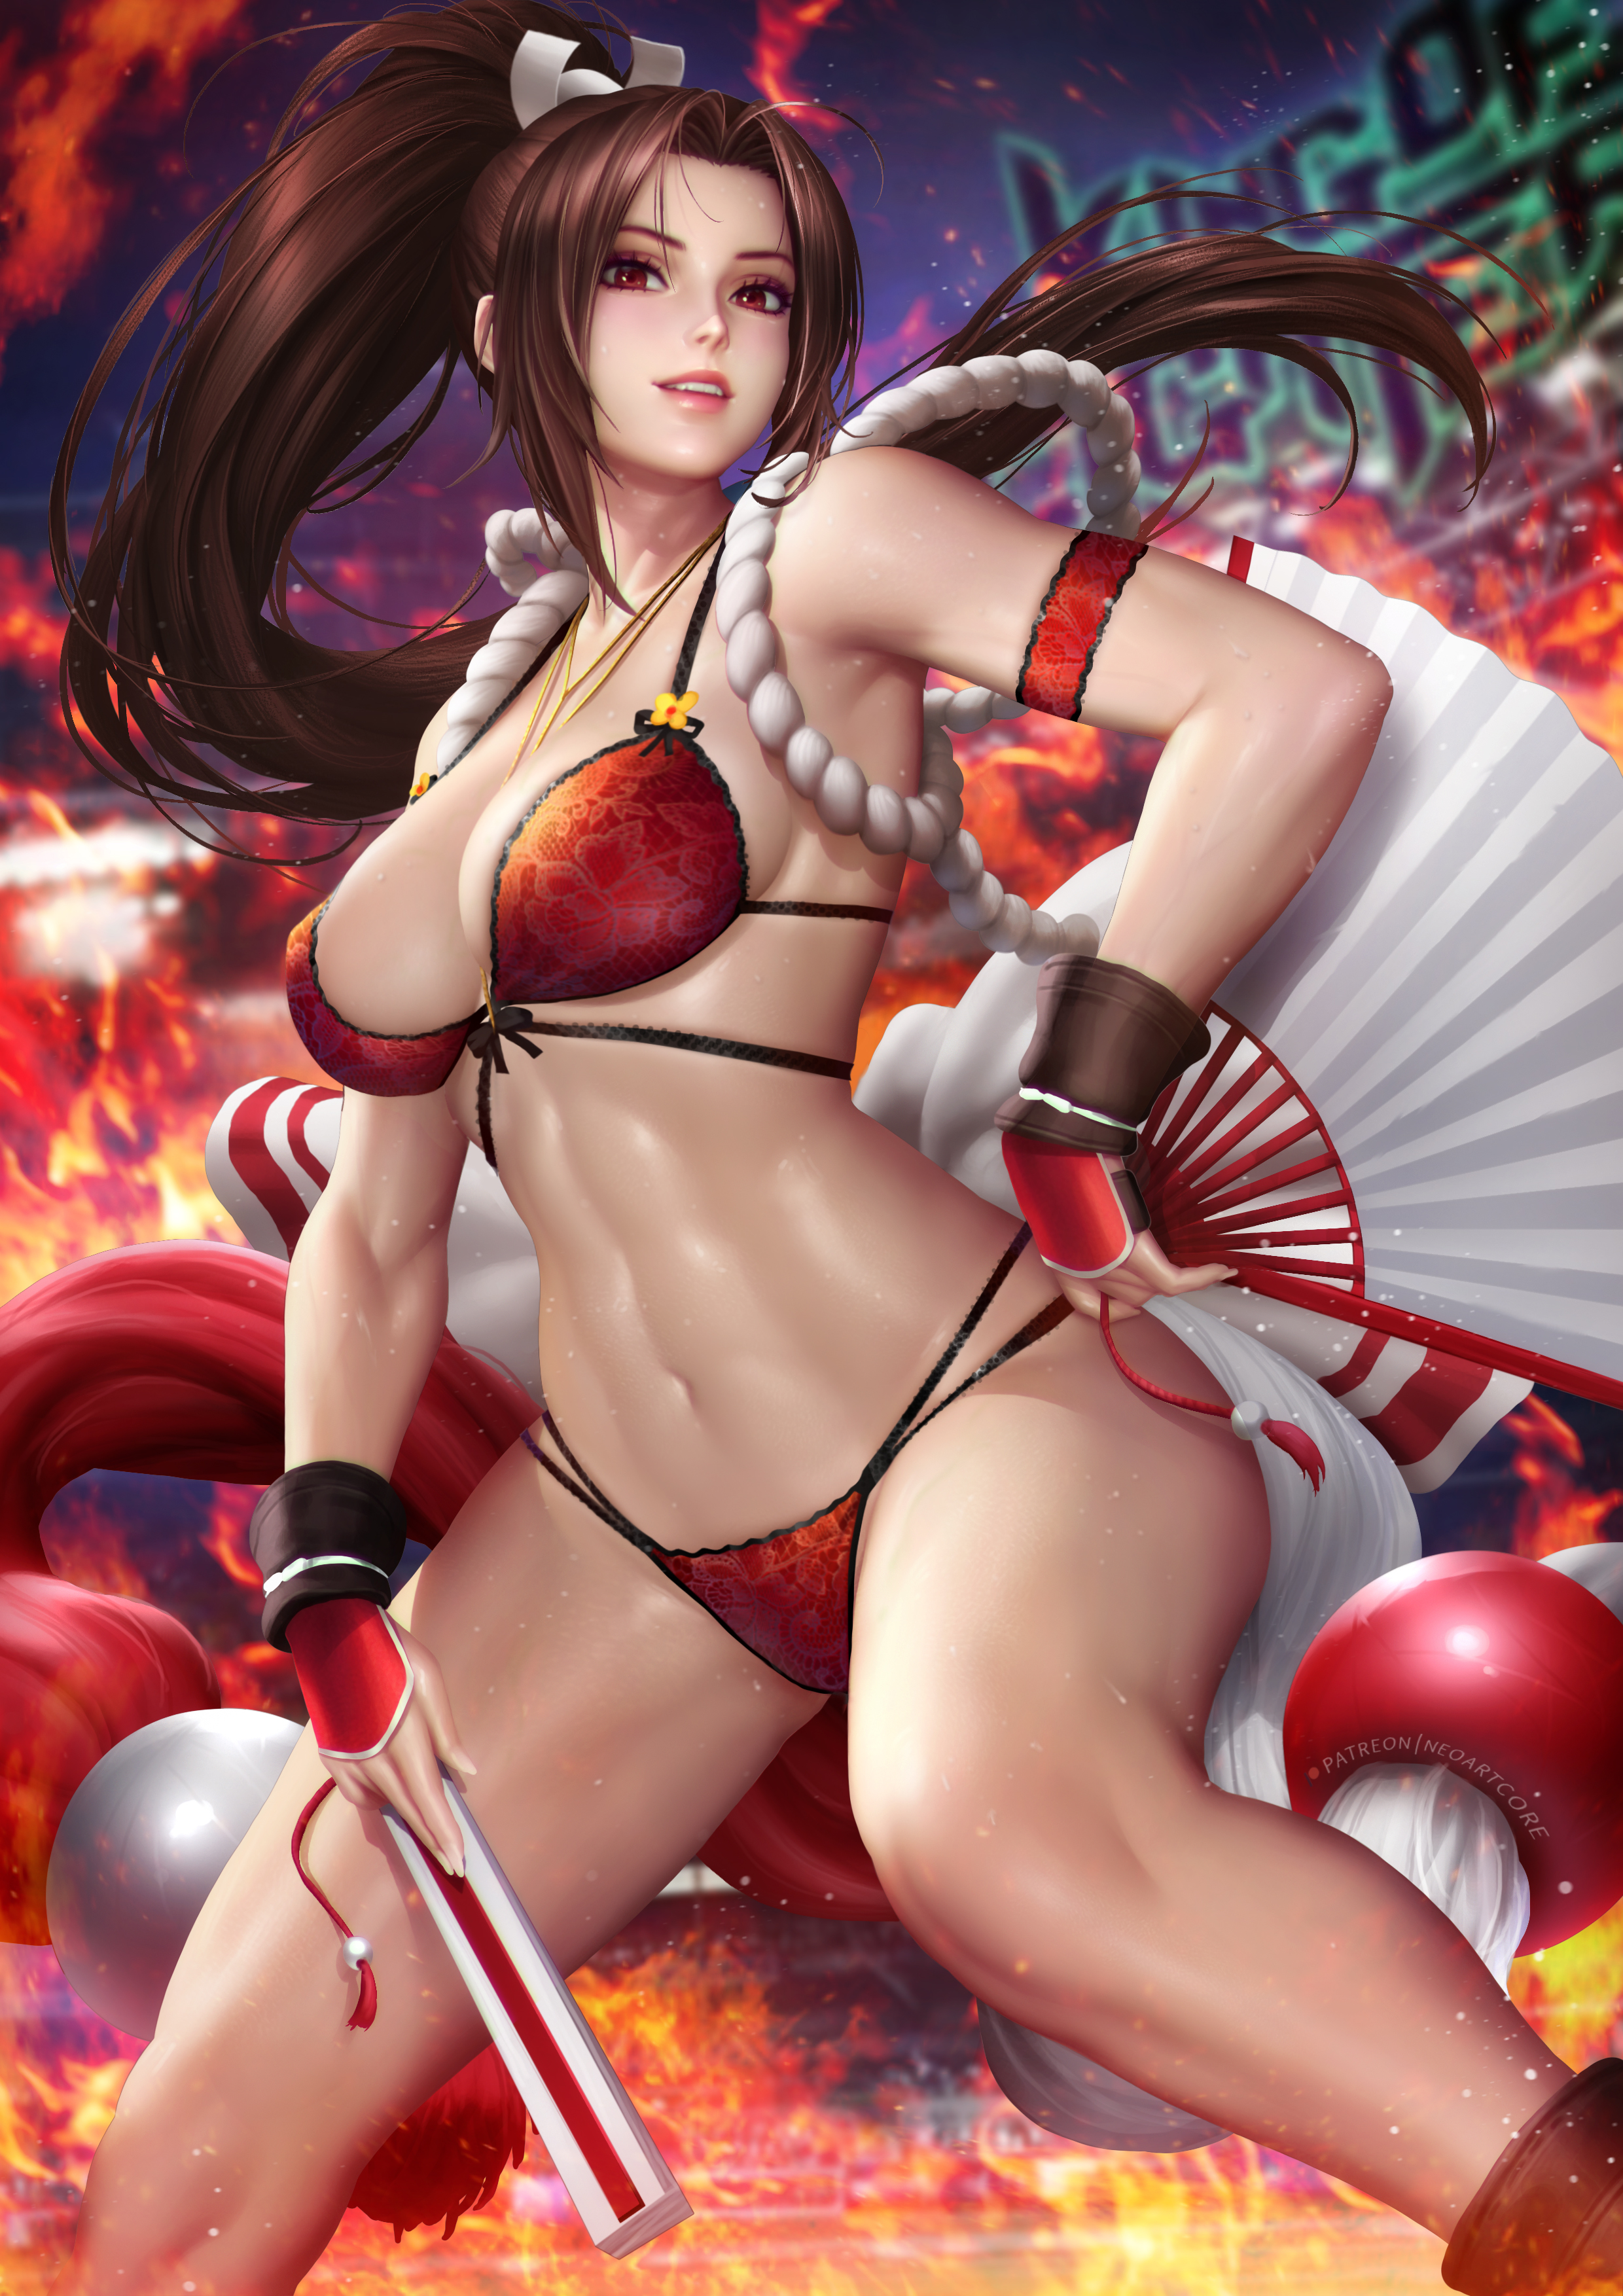 General 2480x3508 Mai Shiranui Fatal Fury King of Fighters SNK video games video game characters video game girls fantasy girl brunette women ponytail long hair red eyes looking at viewer smiling low-angle lace lingerie red lingerie bra panties belly fire depth of field ropes fans portrait display artwork digital art illustration drawing fan art NeoArtCorE (artist)